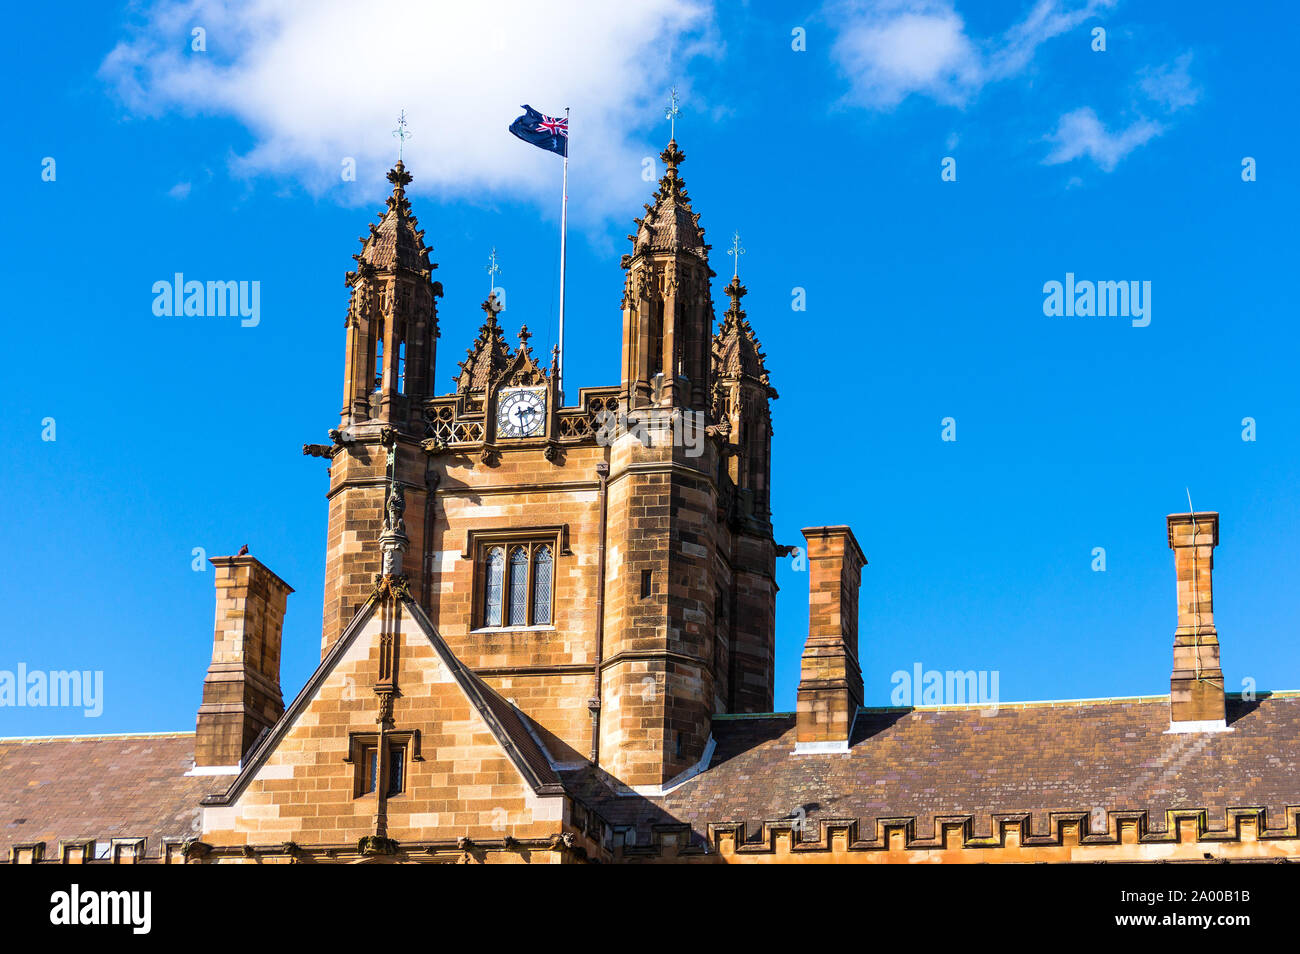 Sydney Uni building facade with Australian flag. University of Sydney against deep blue sky with white clouds, daytime photo Stock Photo